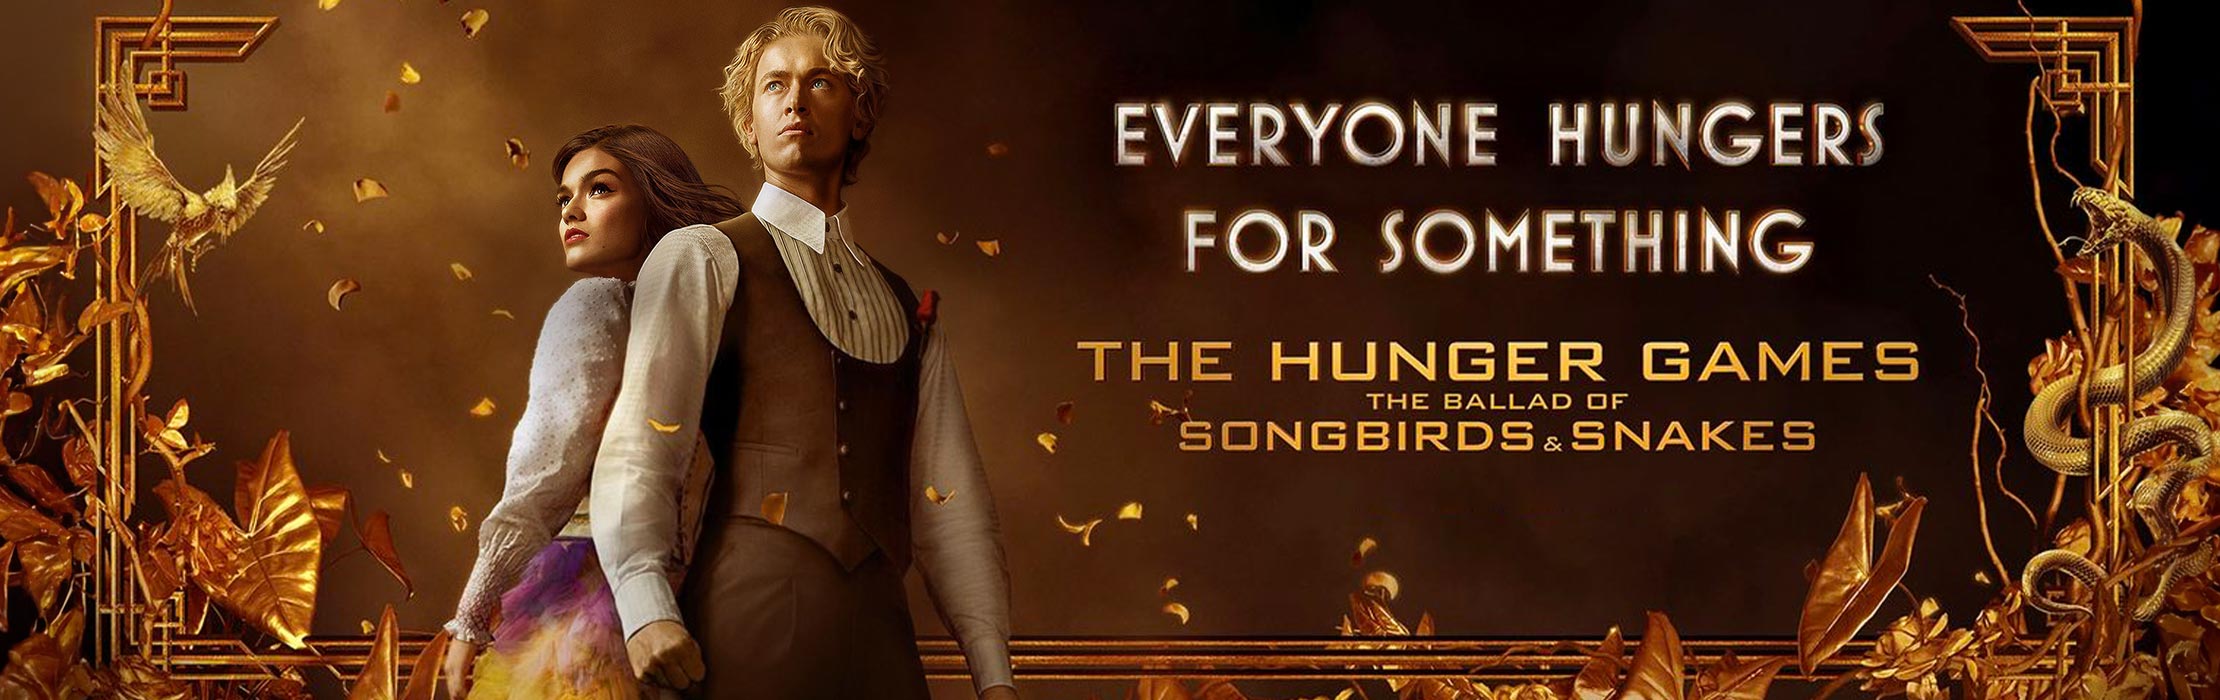 The Hunger Games: The Ballad of Songbirds And Snakes